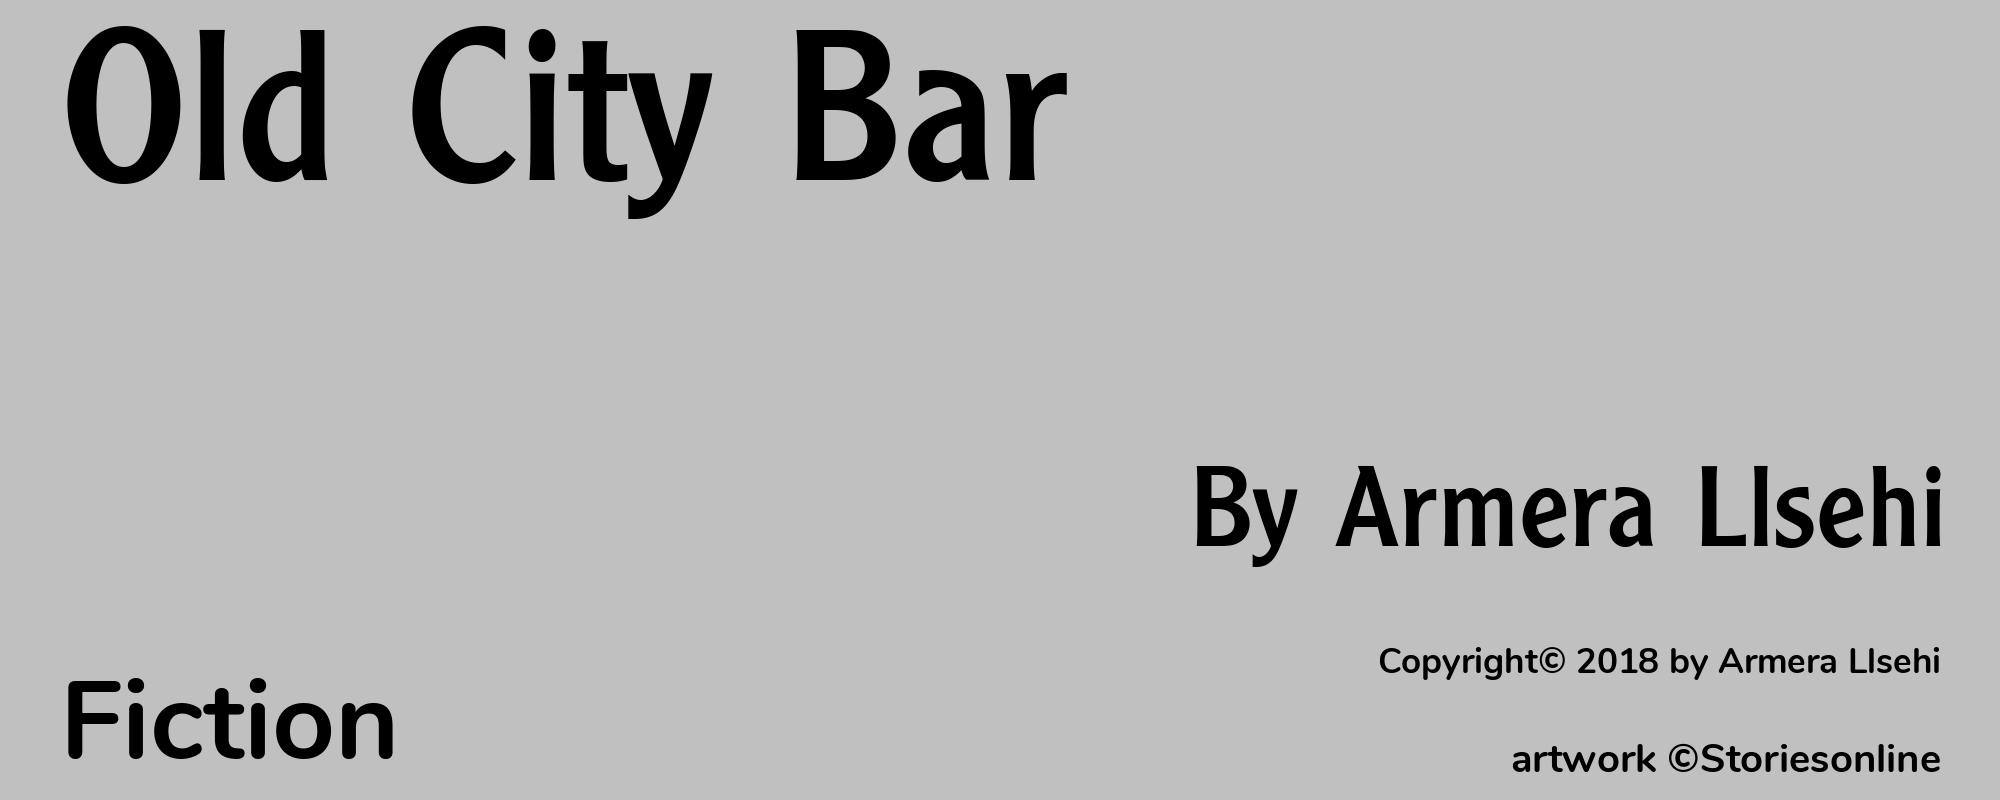 Old City Bar - Cover